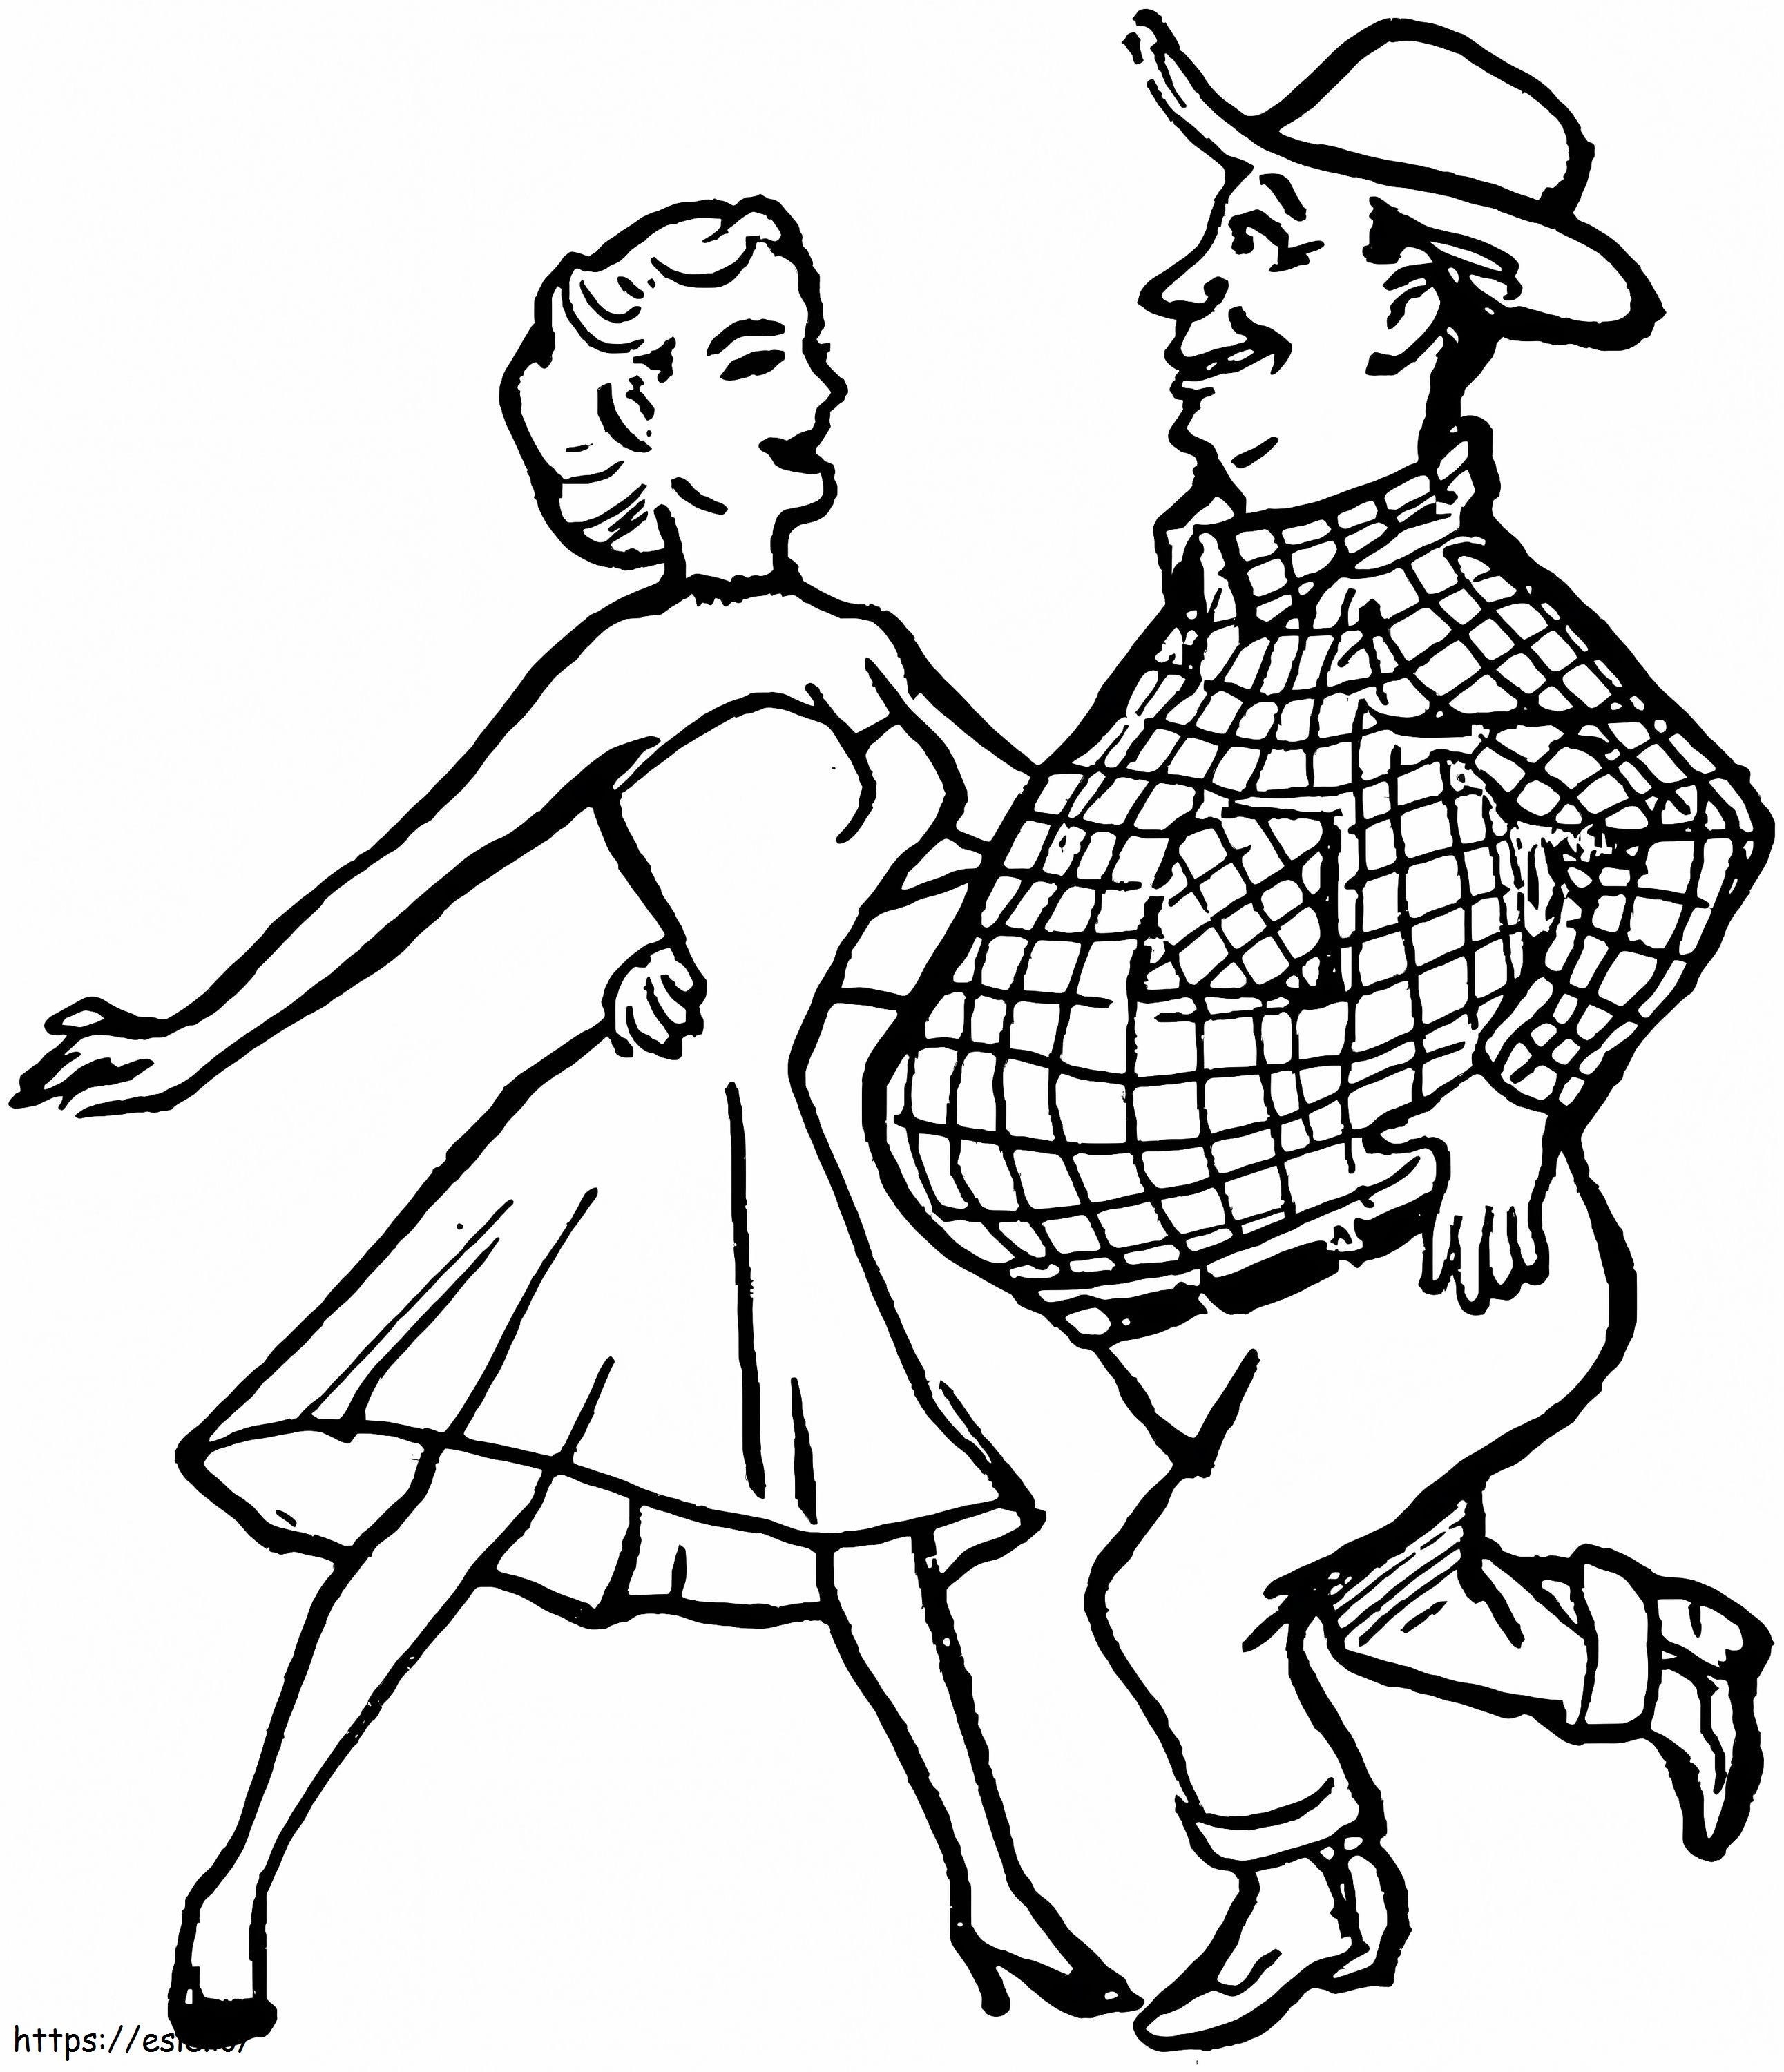 Rumba Dance coloring page